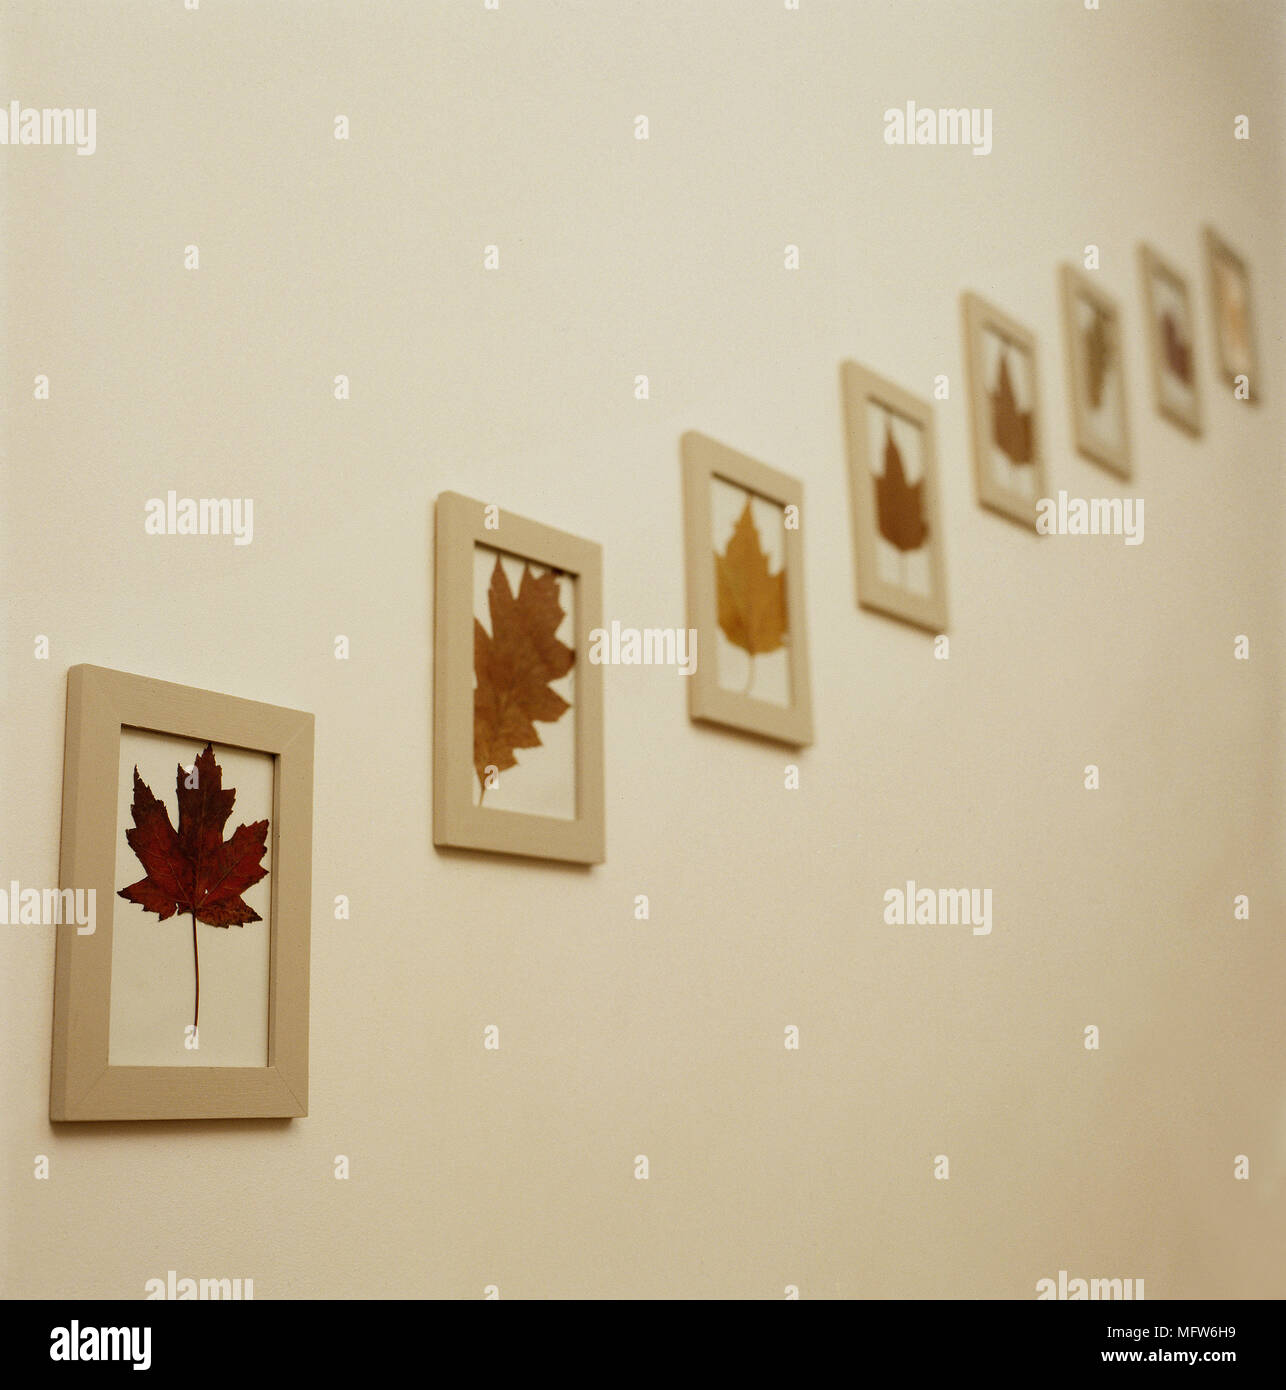 Detail of a collection of framed autumn leaves in a staggered pattern. Stock Photo